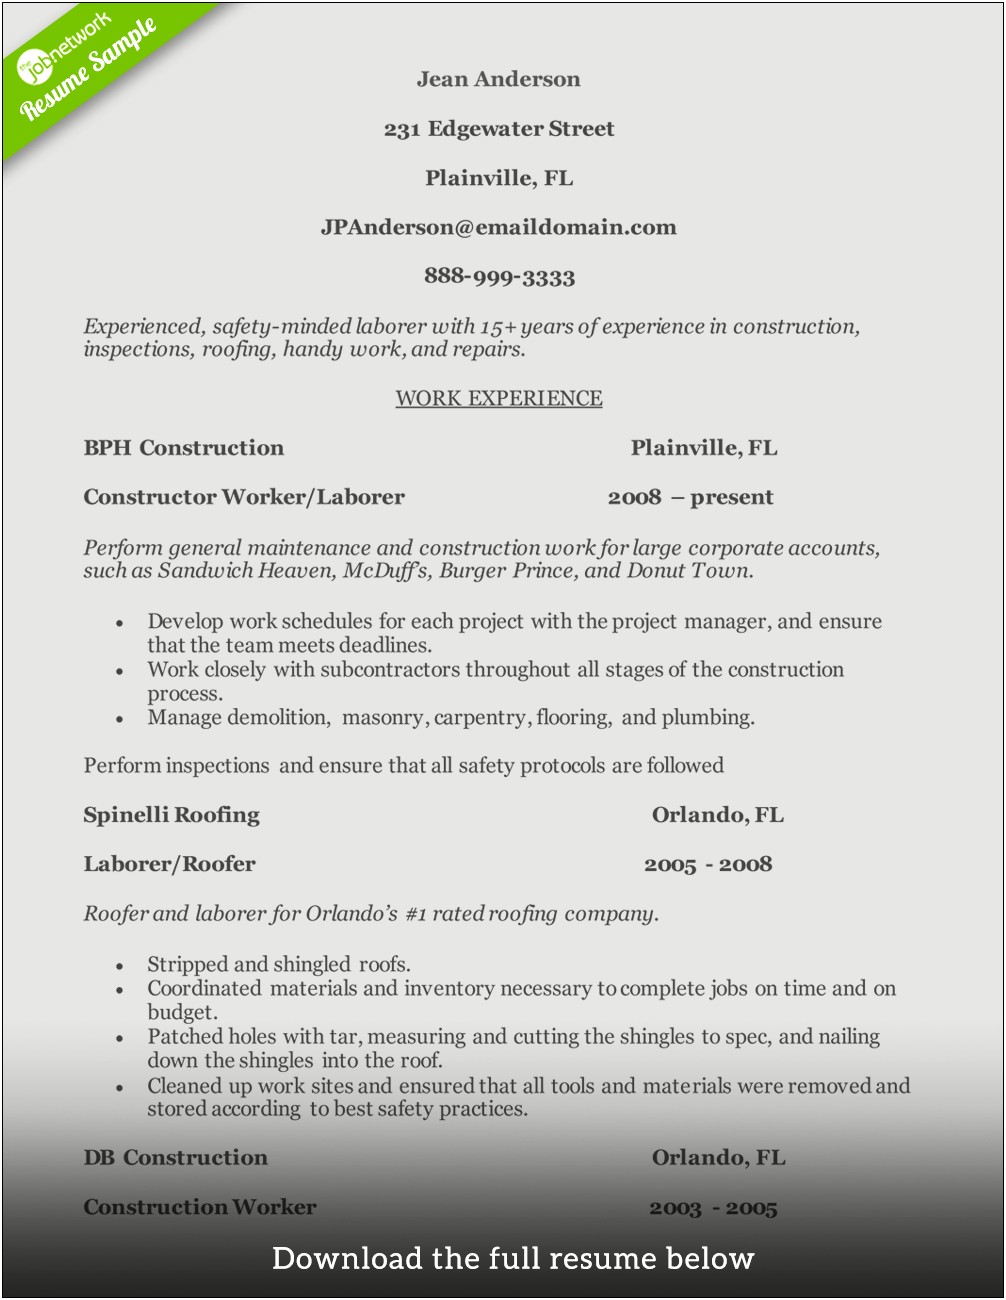 Free Resume For Construction Foreman